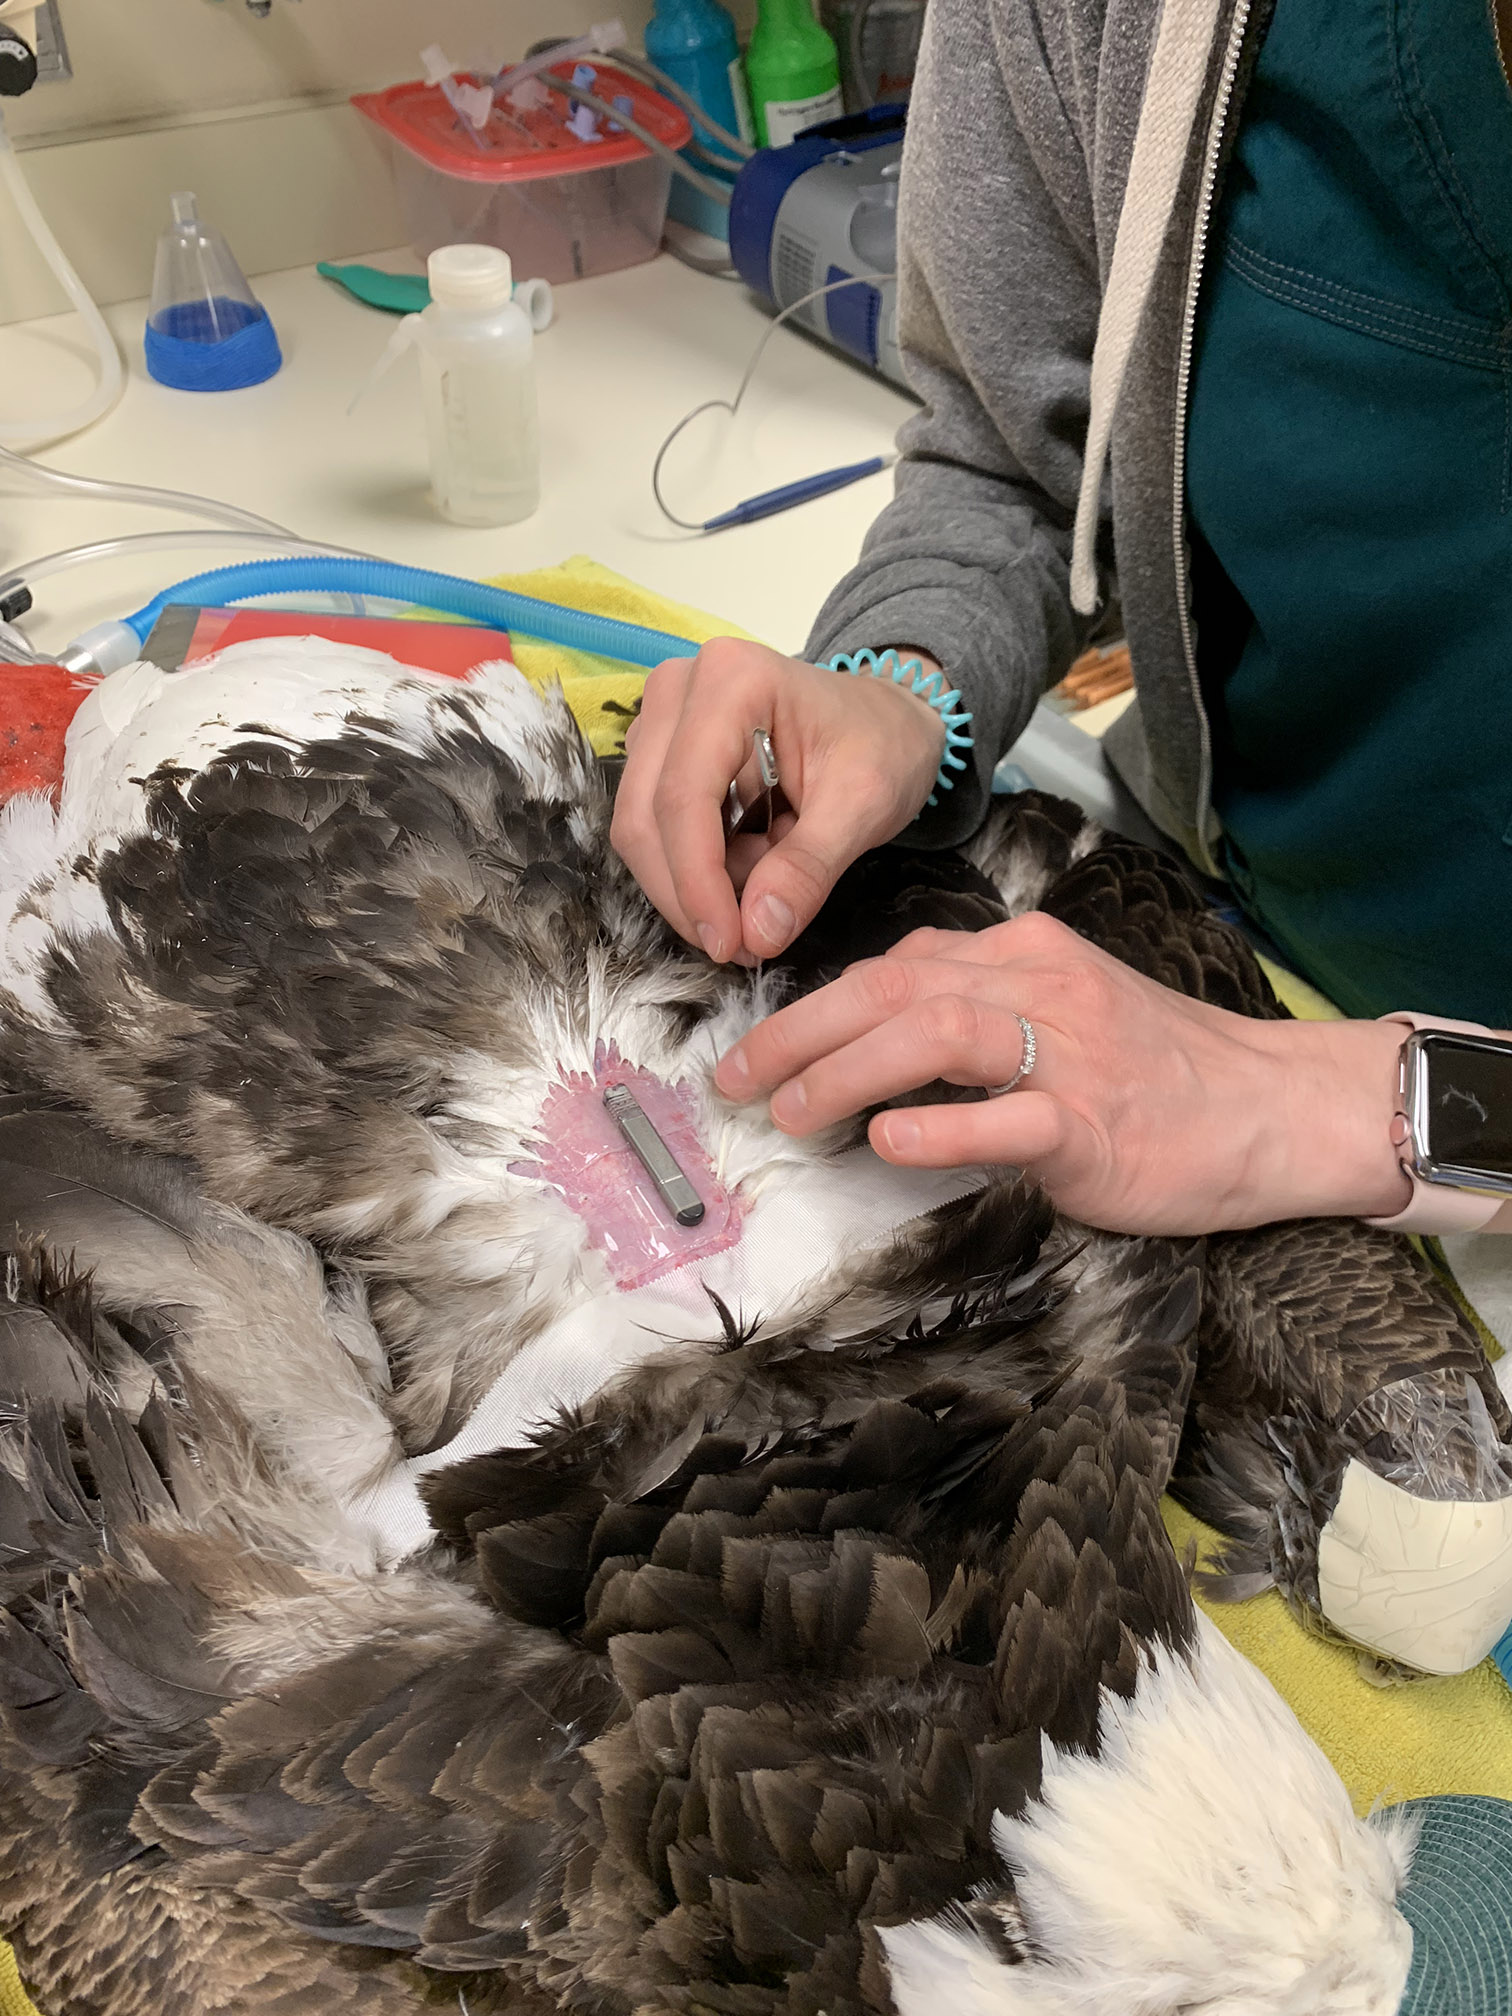 A bald eagle being equipped with an implanted cardiac monitor